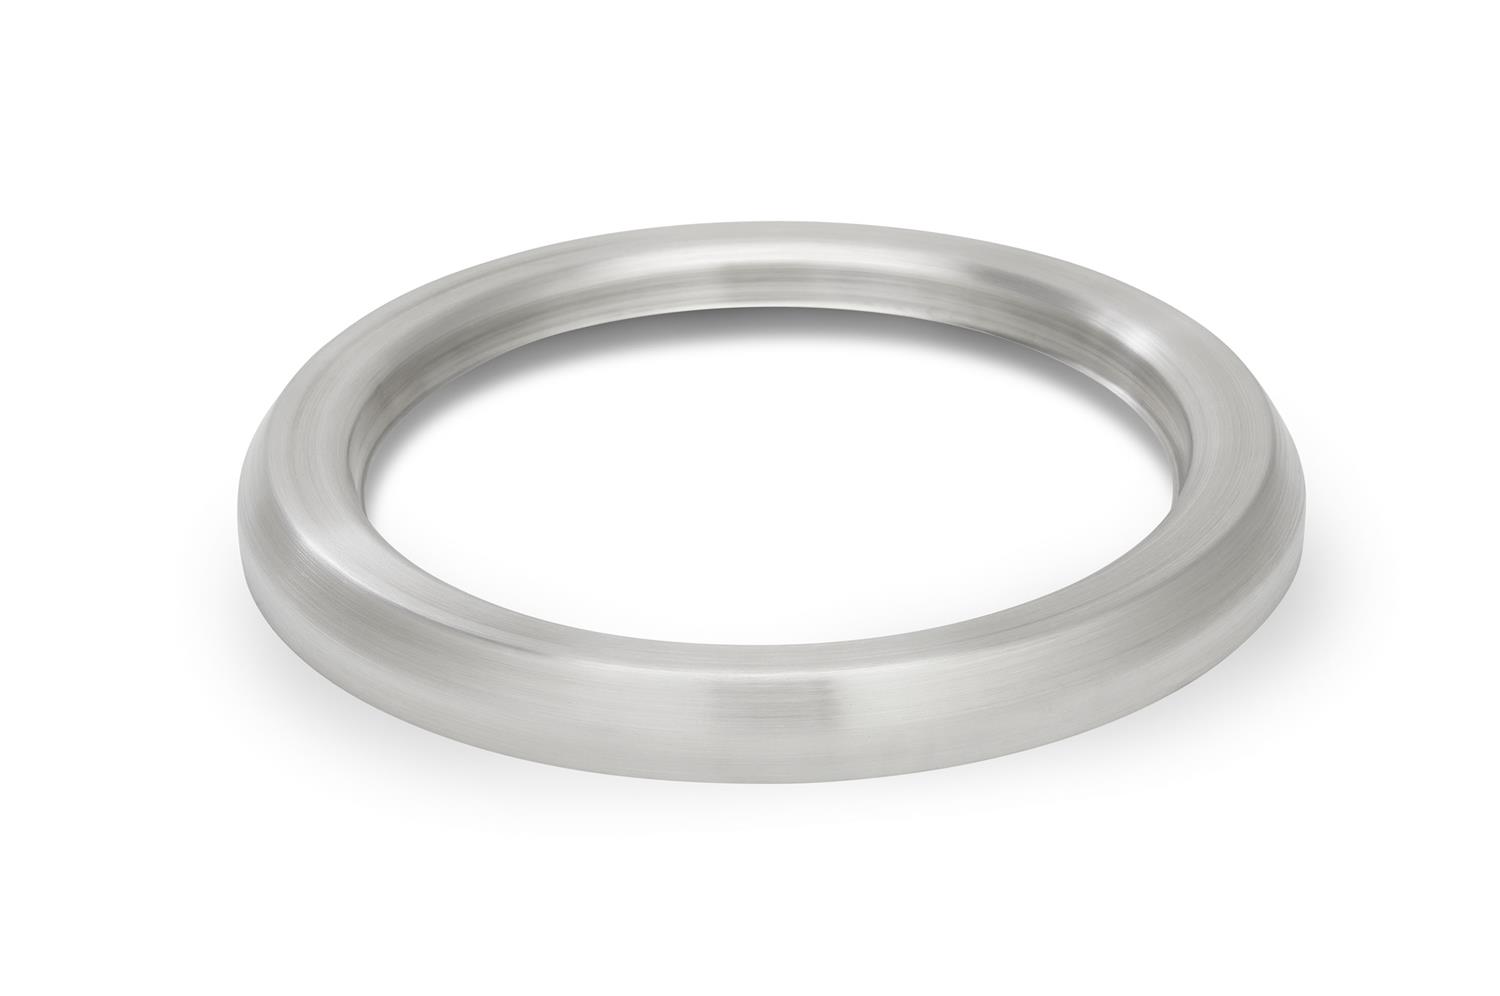 Vollrath 47491 Stainless Steel Decorative Ring